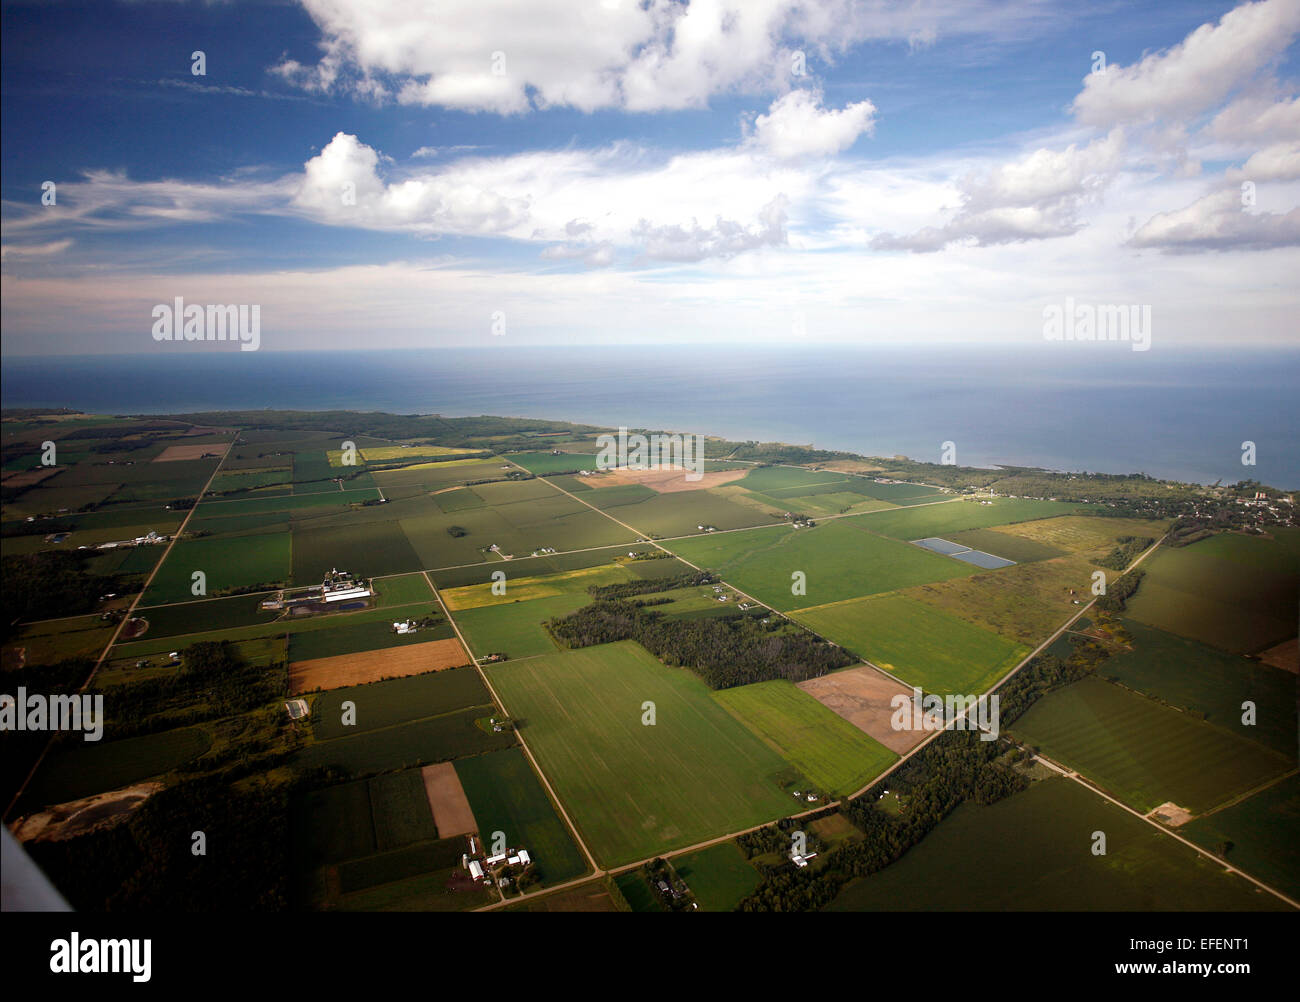 Bay county michigan aerial photography on cd